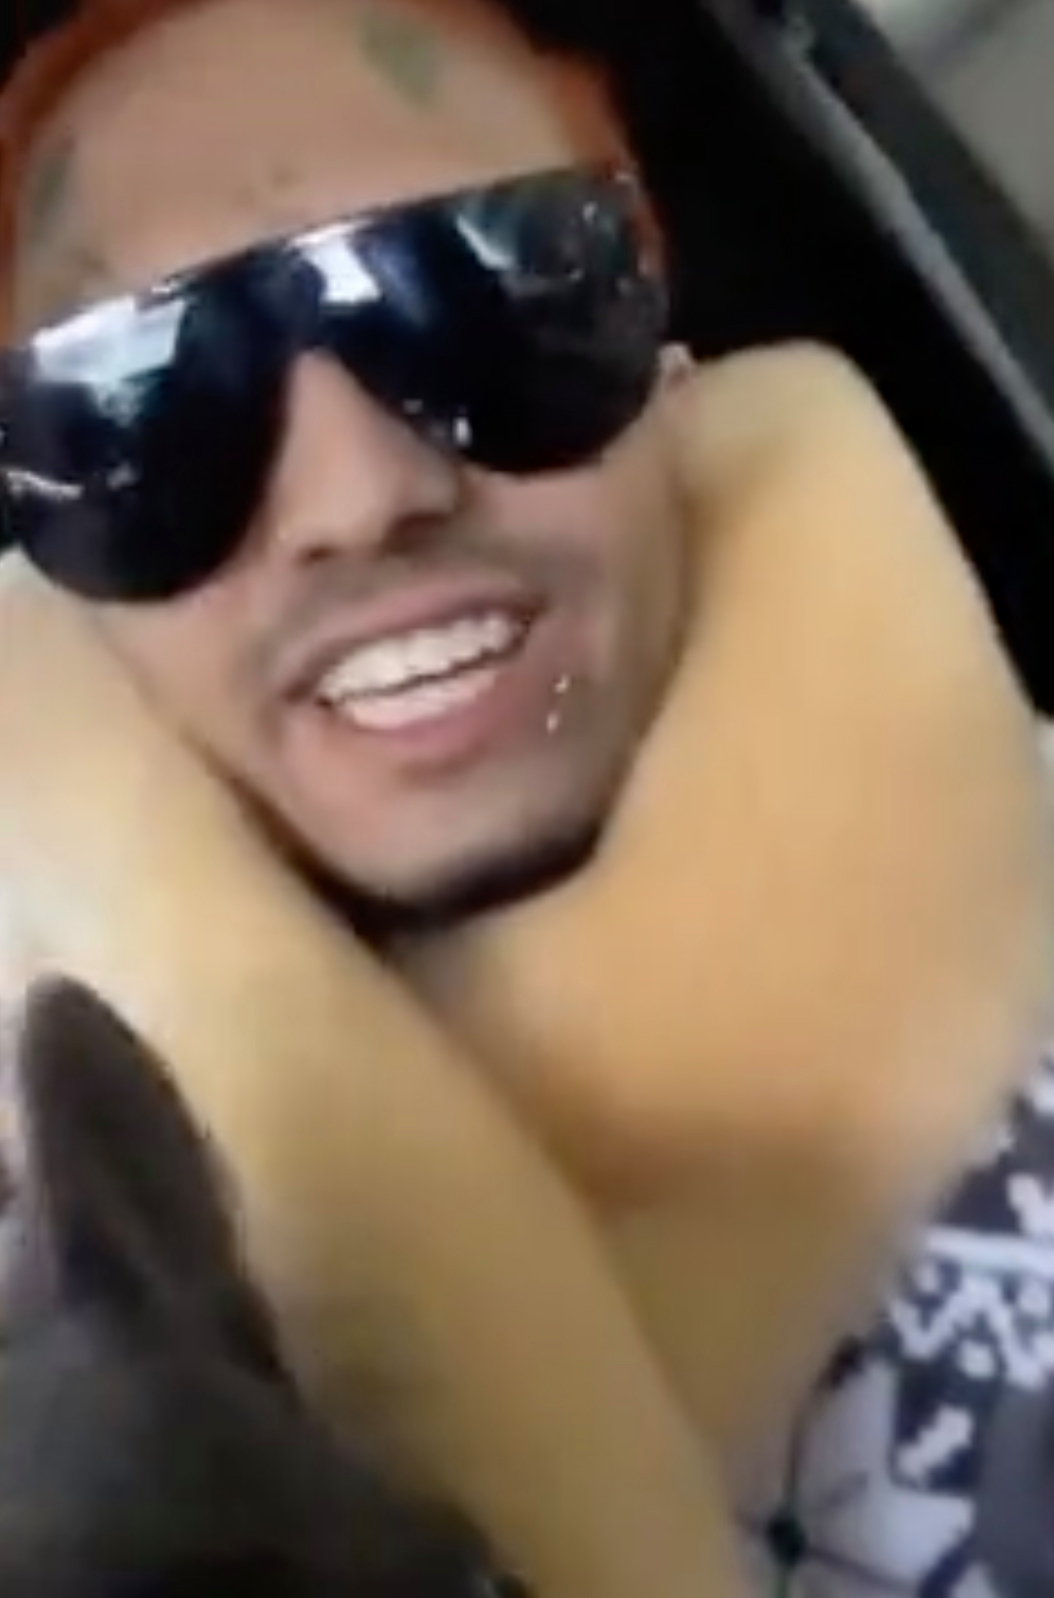 Lil Pump banned from flying JetBlue after he refuses to wear a mask and claims Covid is a ‘hoax’